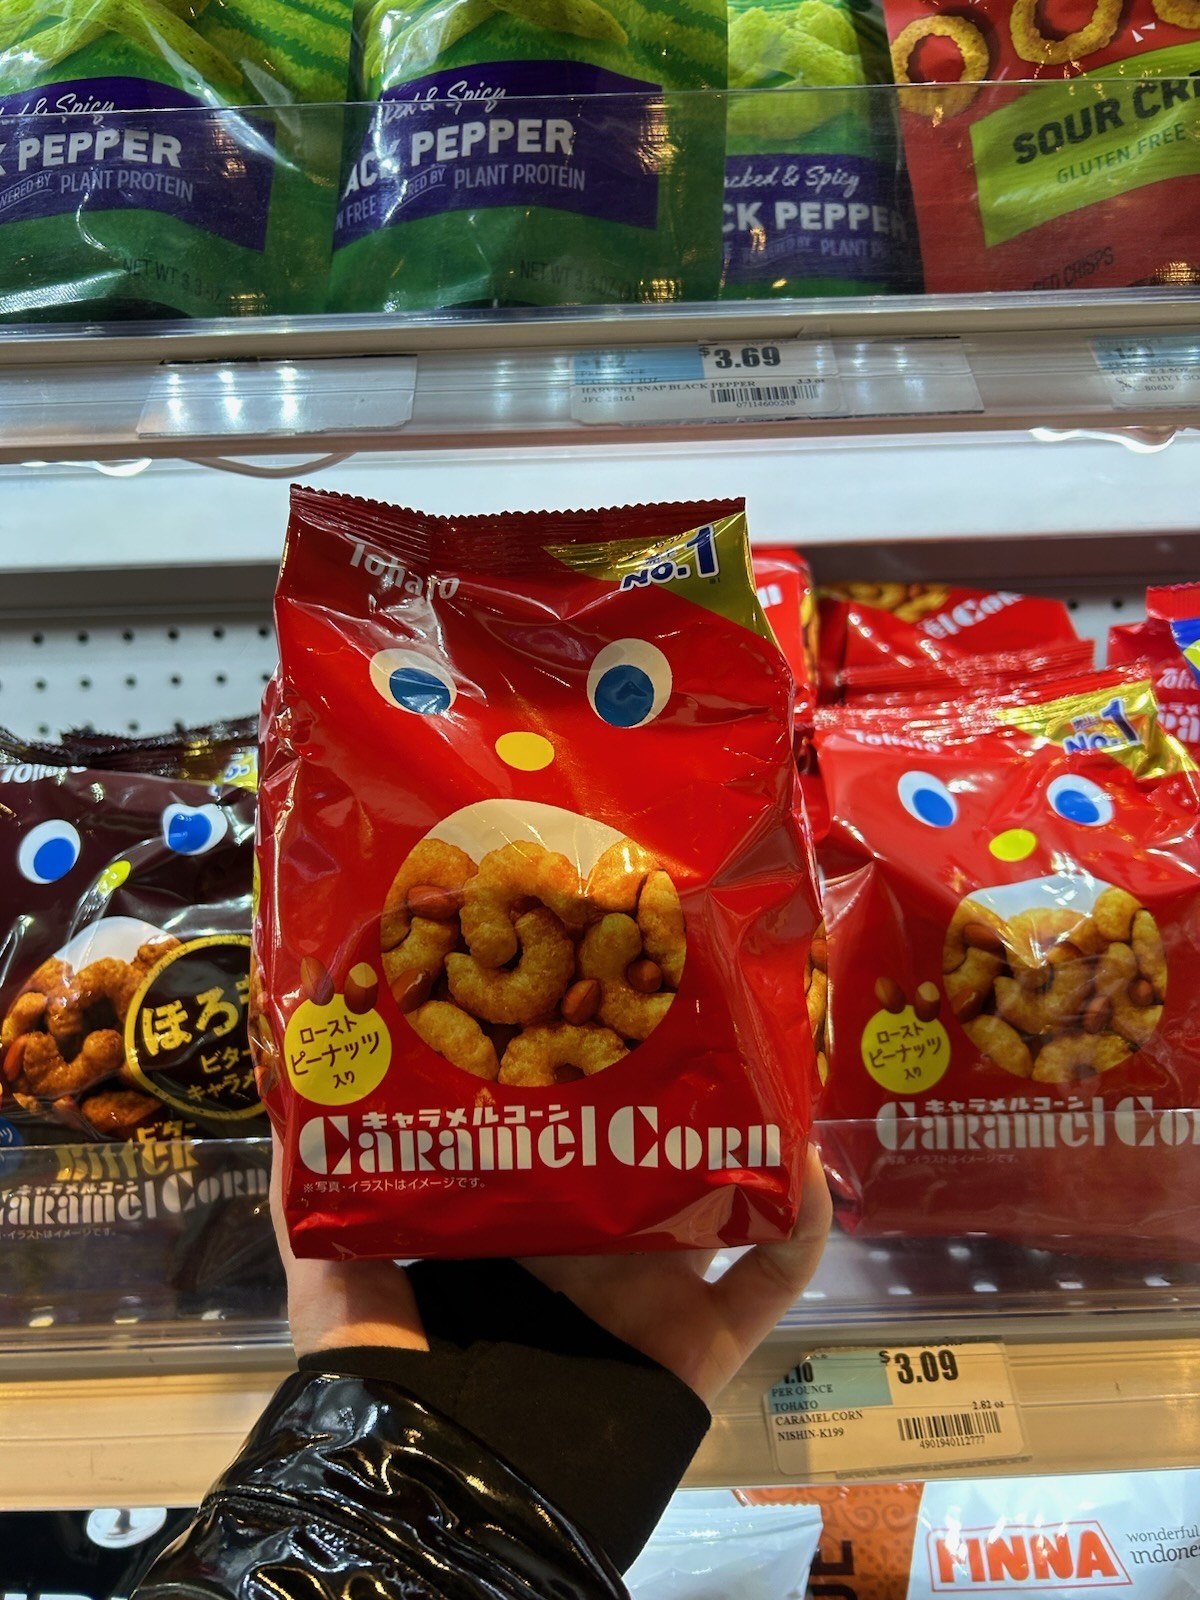 bag of the snack in the aisle